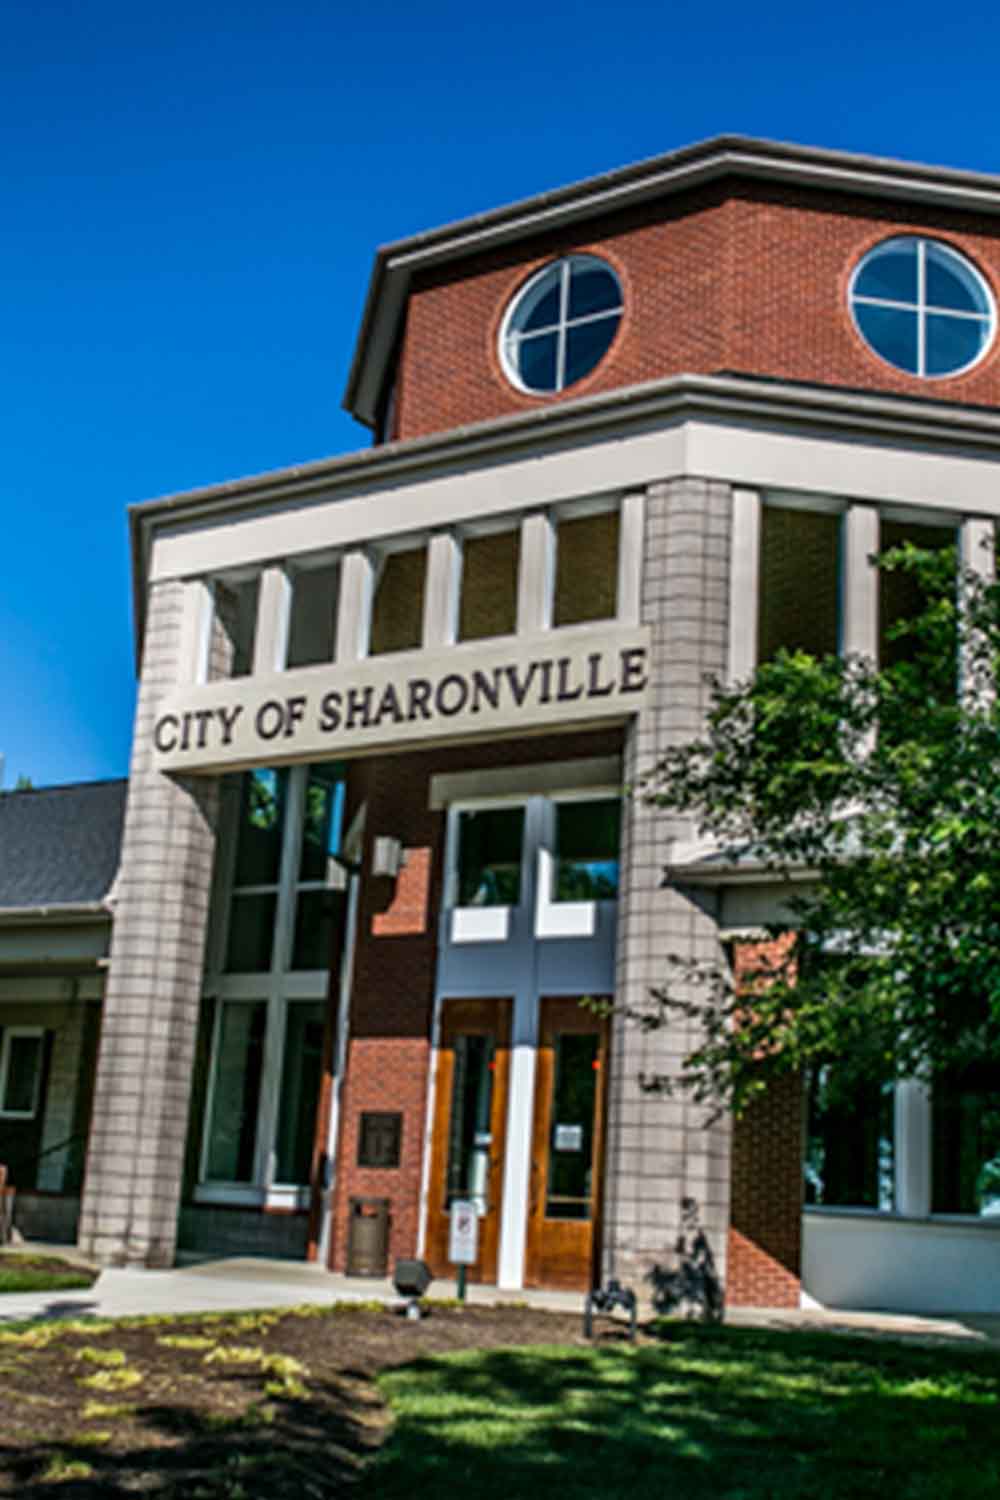 Sharonville Heating & Cooling services